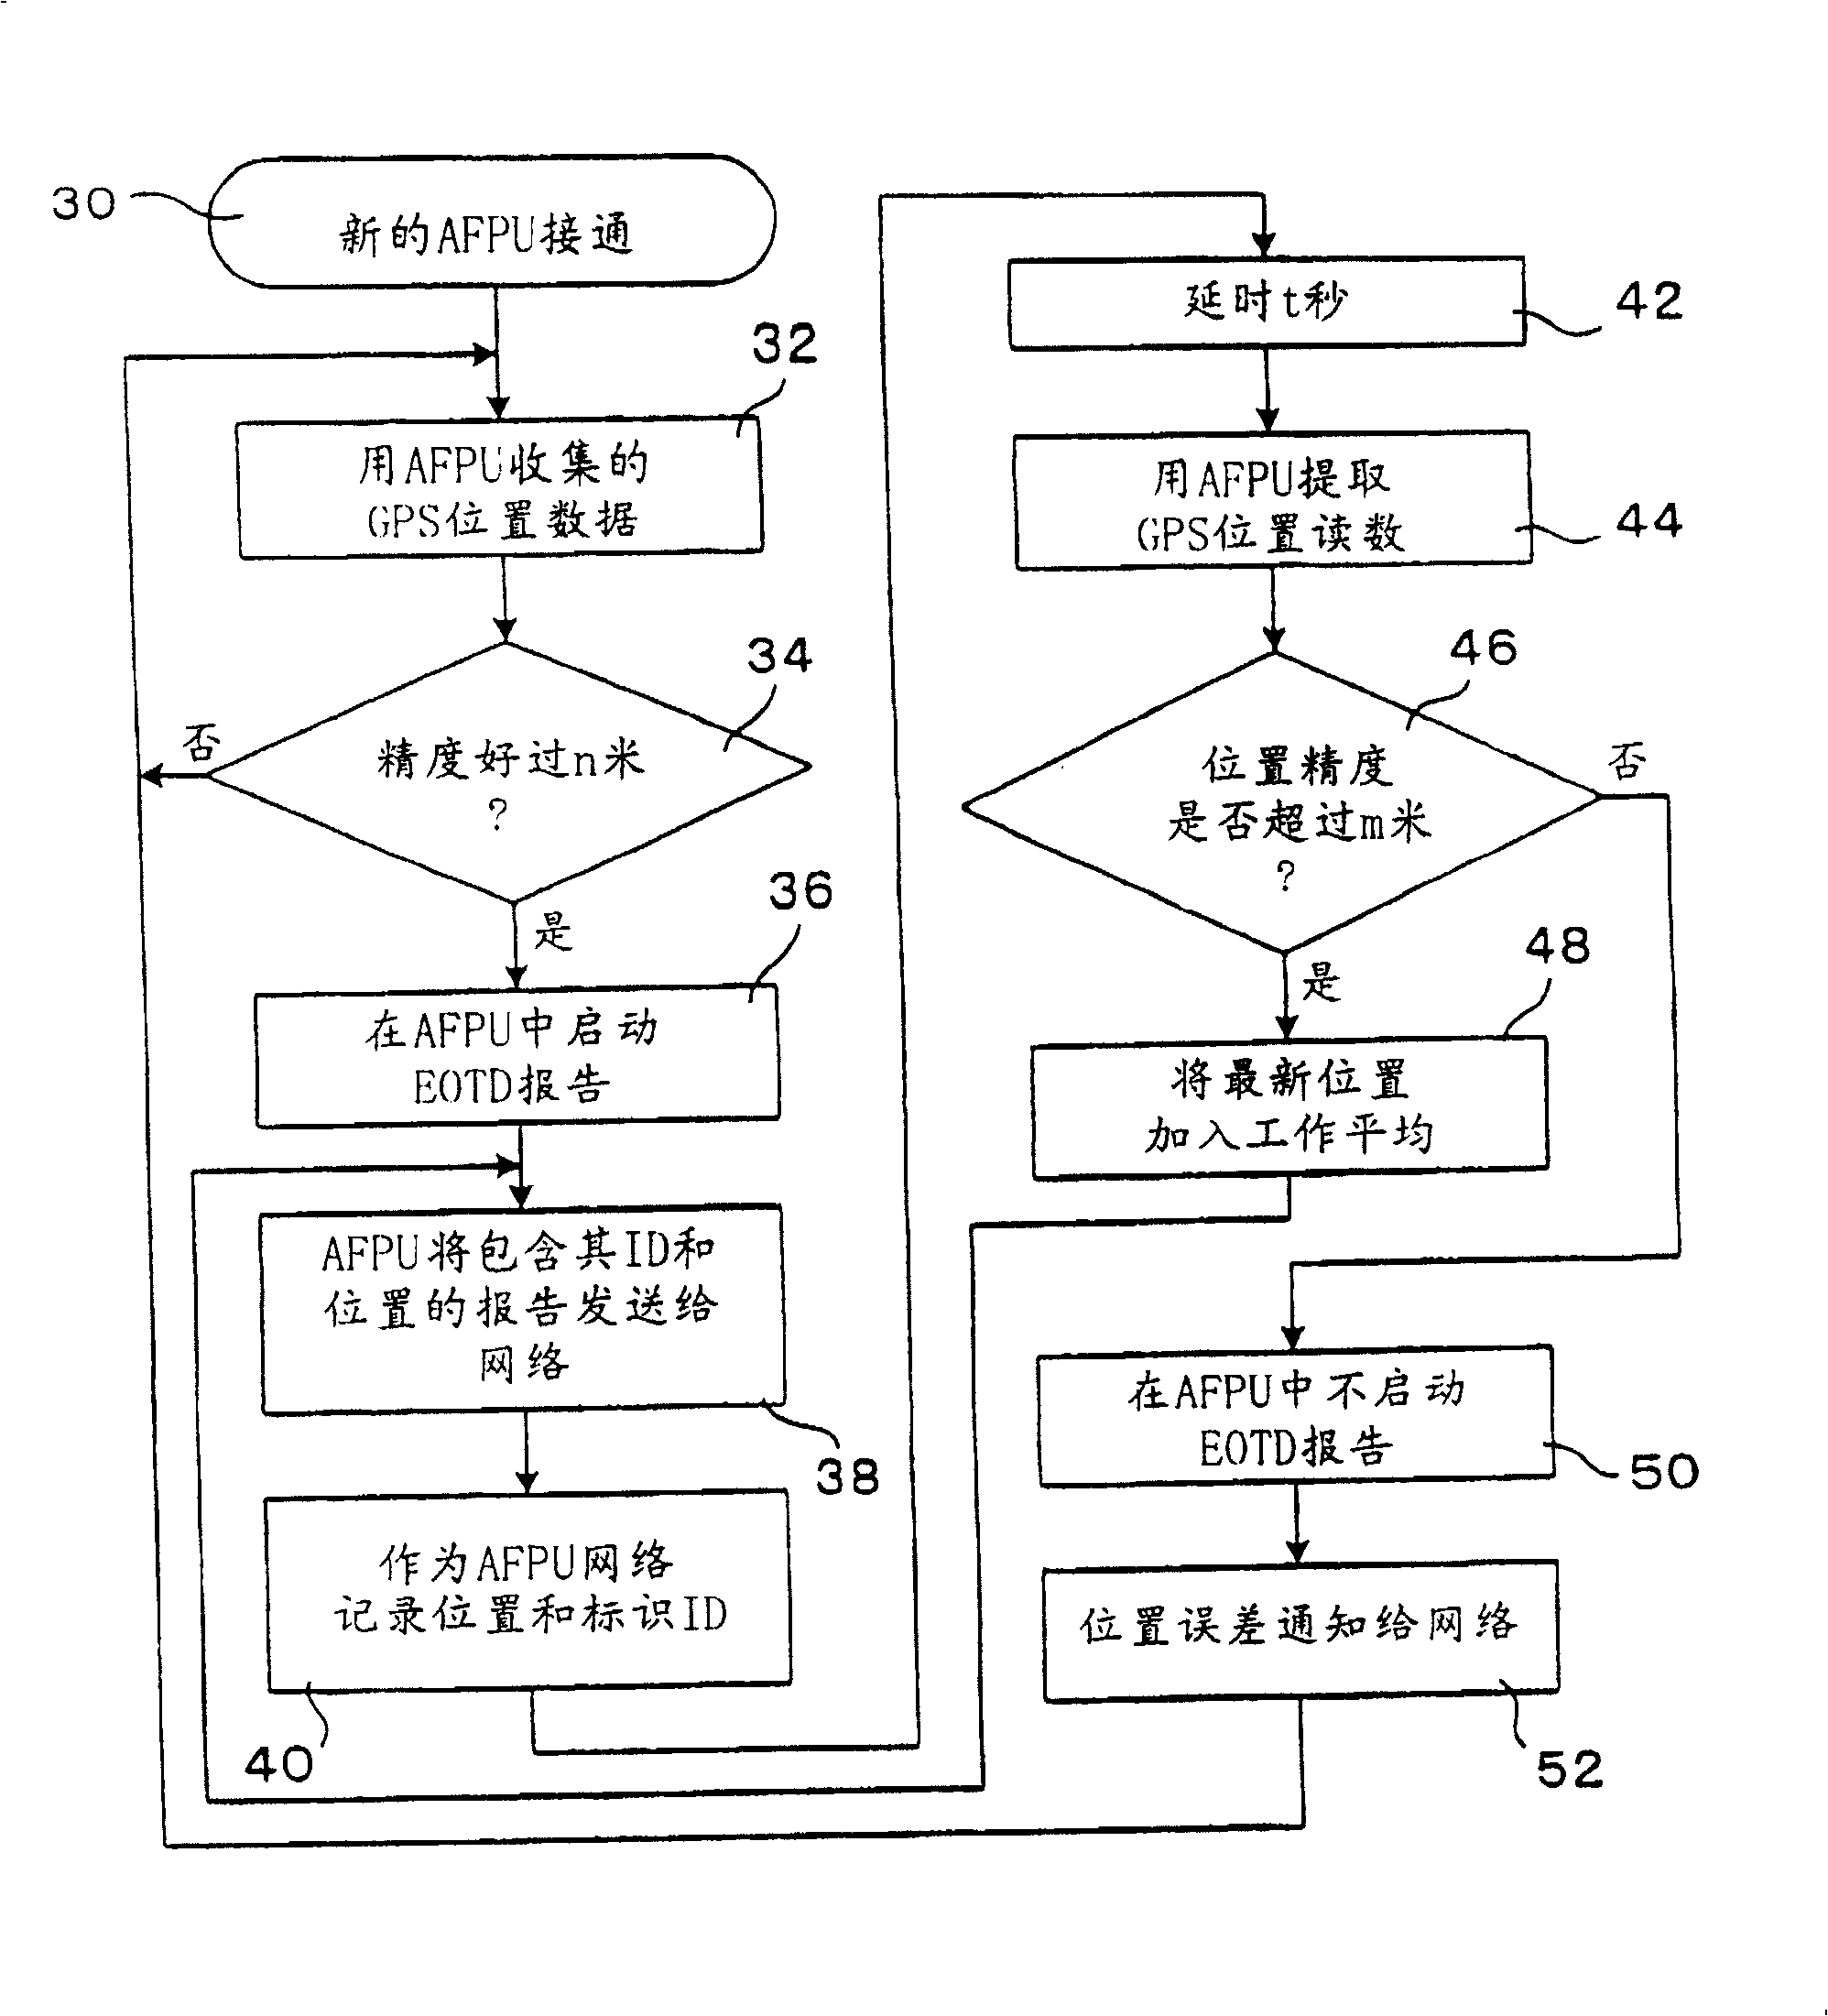 Improved positioning system and cellular communication network